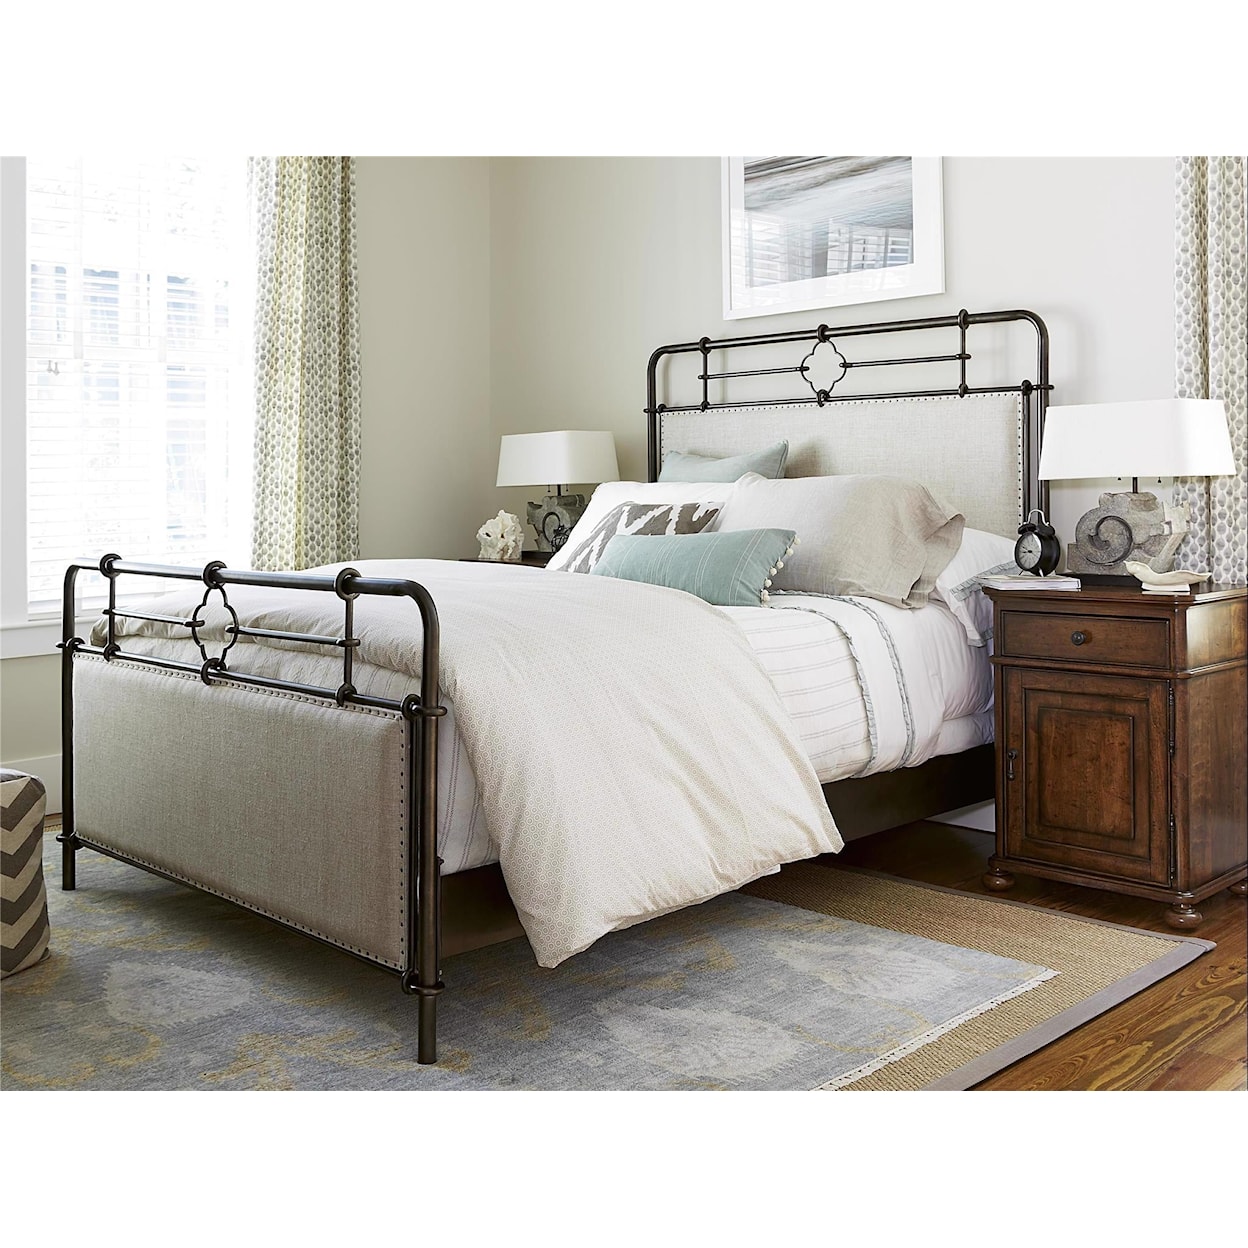 Universal Curated Upholstered Queen Bed